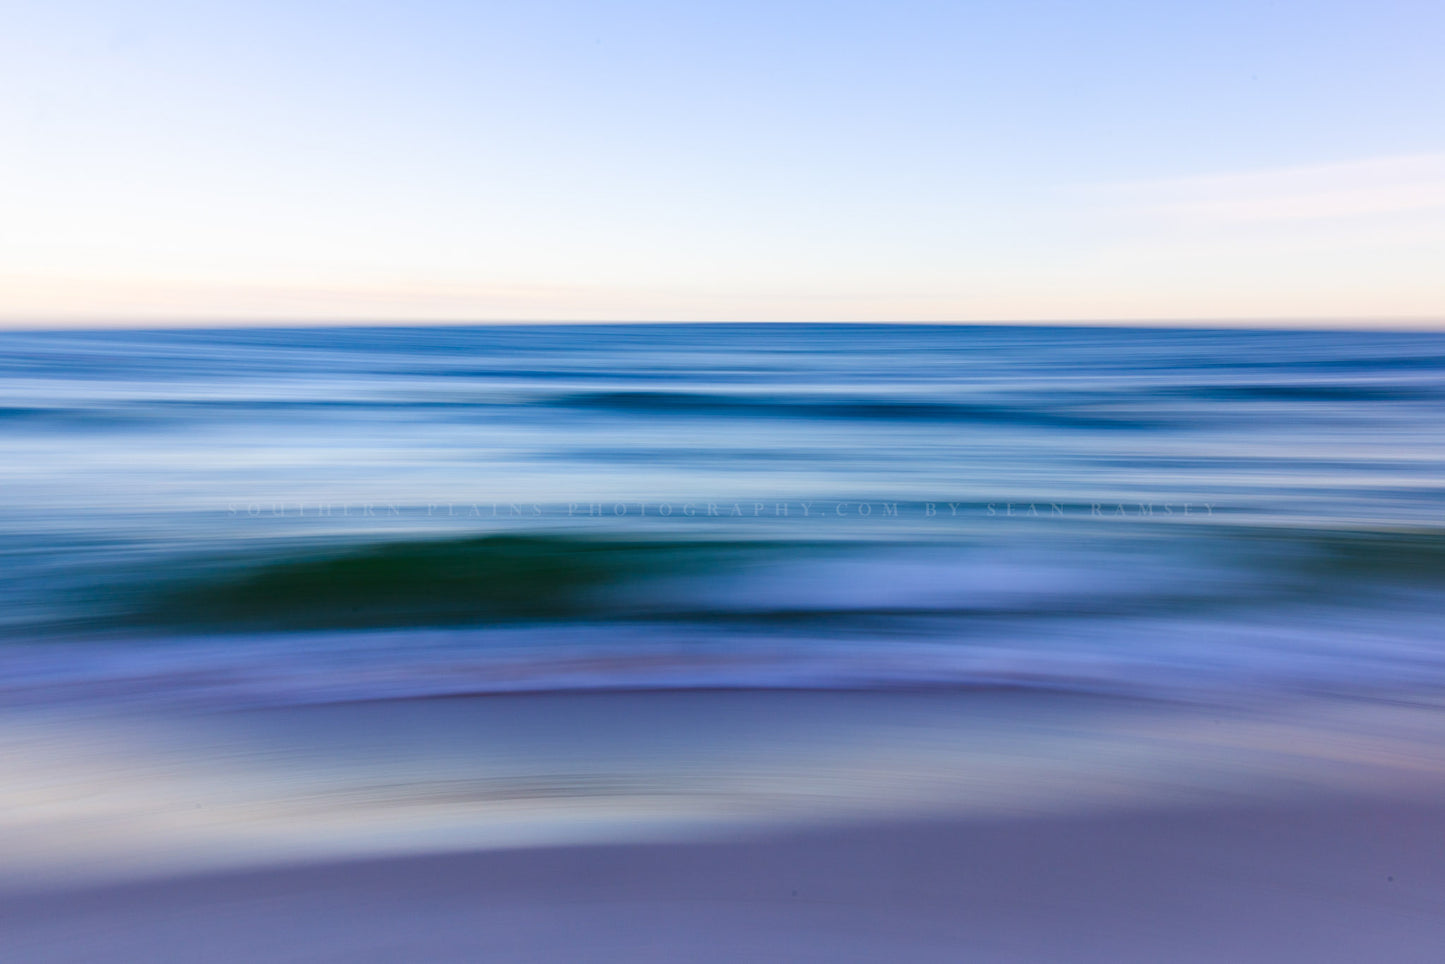 Abstract photography print of water and sky along a beach at Orange Beach, Alabama by Sean Ramsey of Southern Plains Photography.